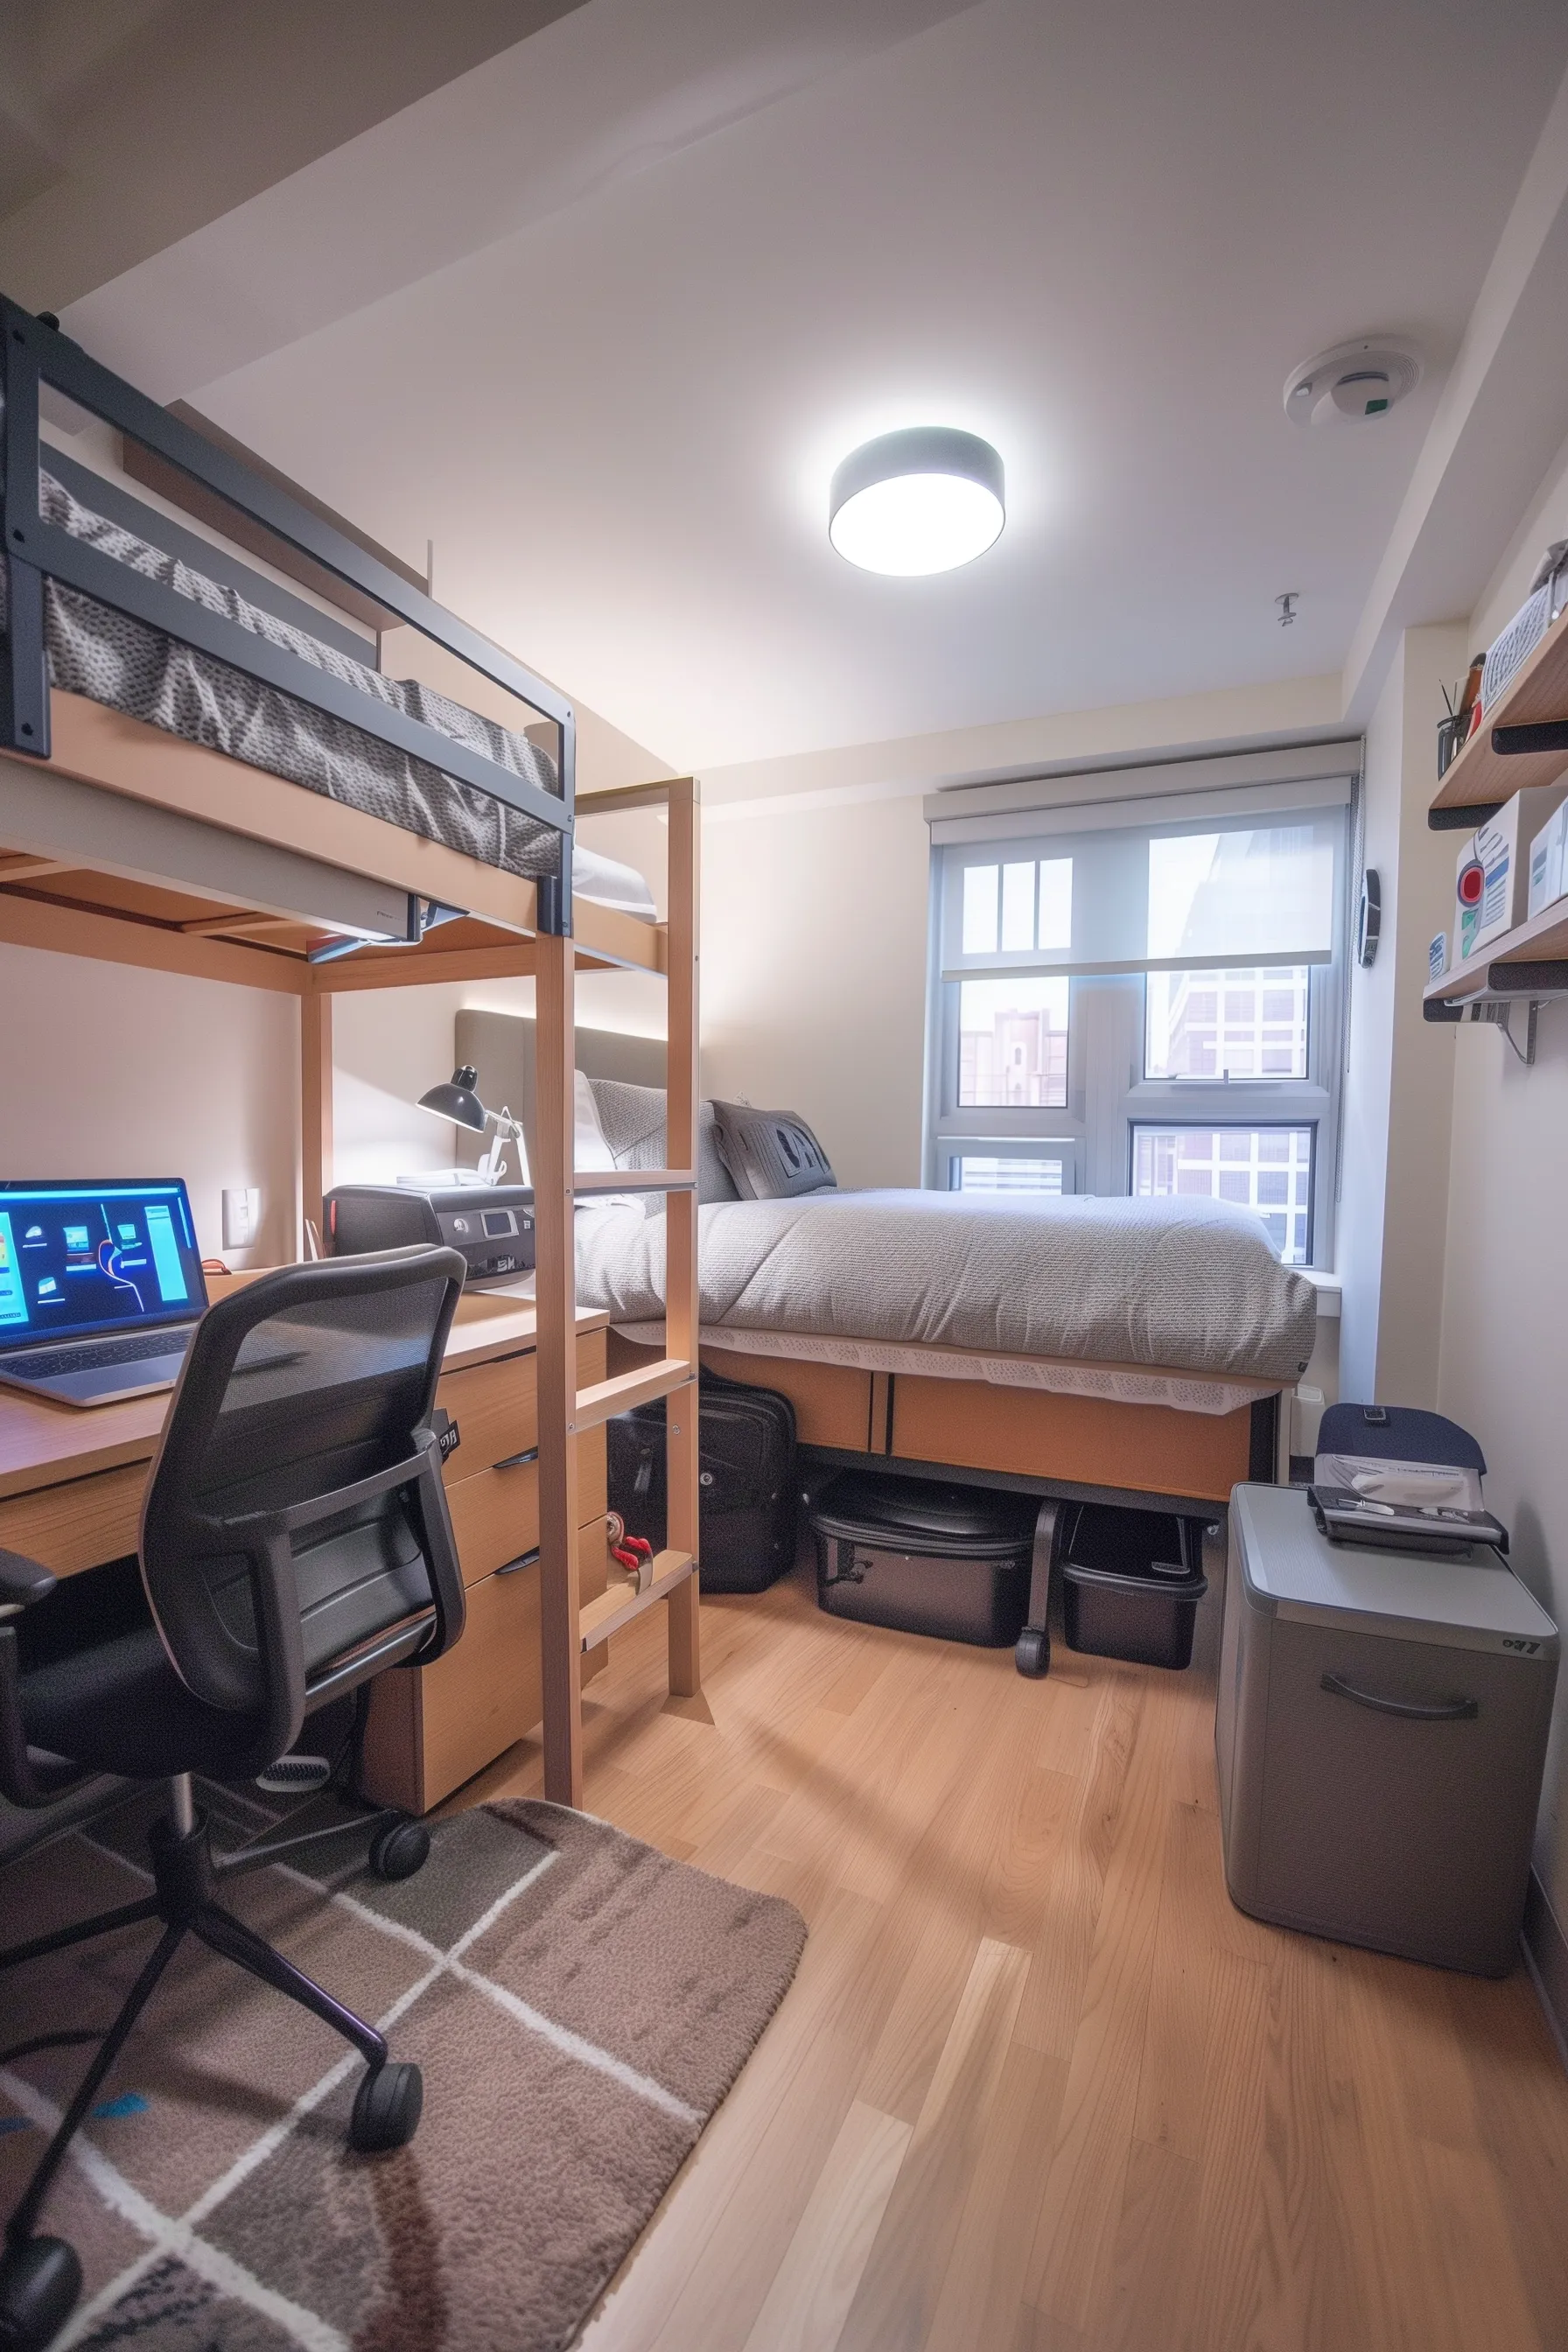 This dorm room is very simple, it features a white blanket, drawers, a desk, fairy lights, and artwork.